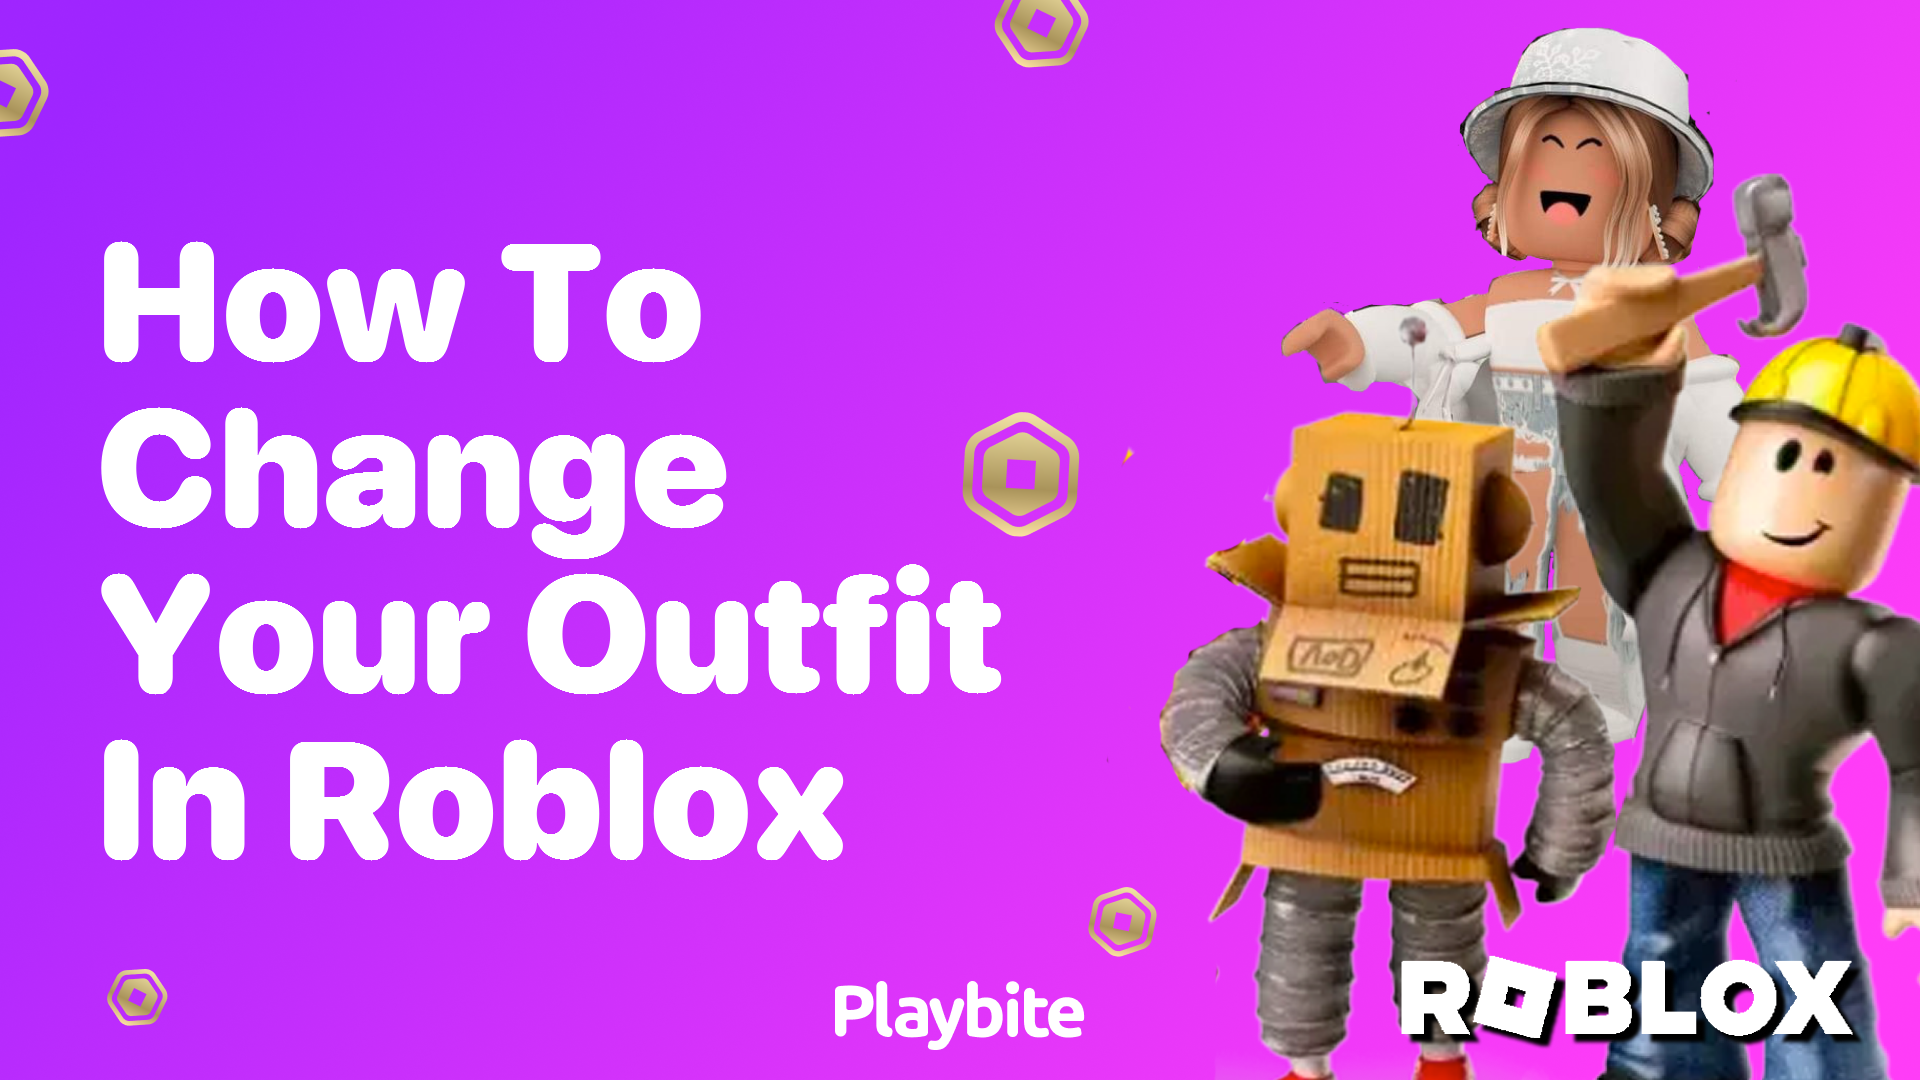 How to Change Your Outfit in Roblox